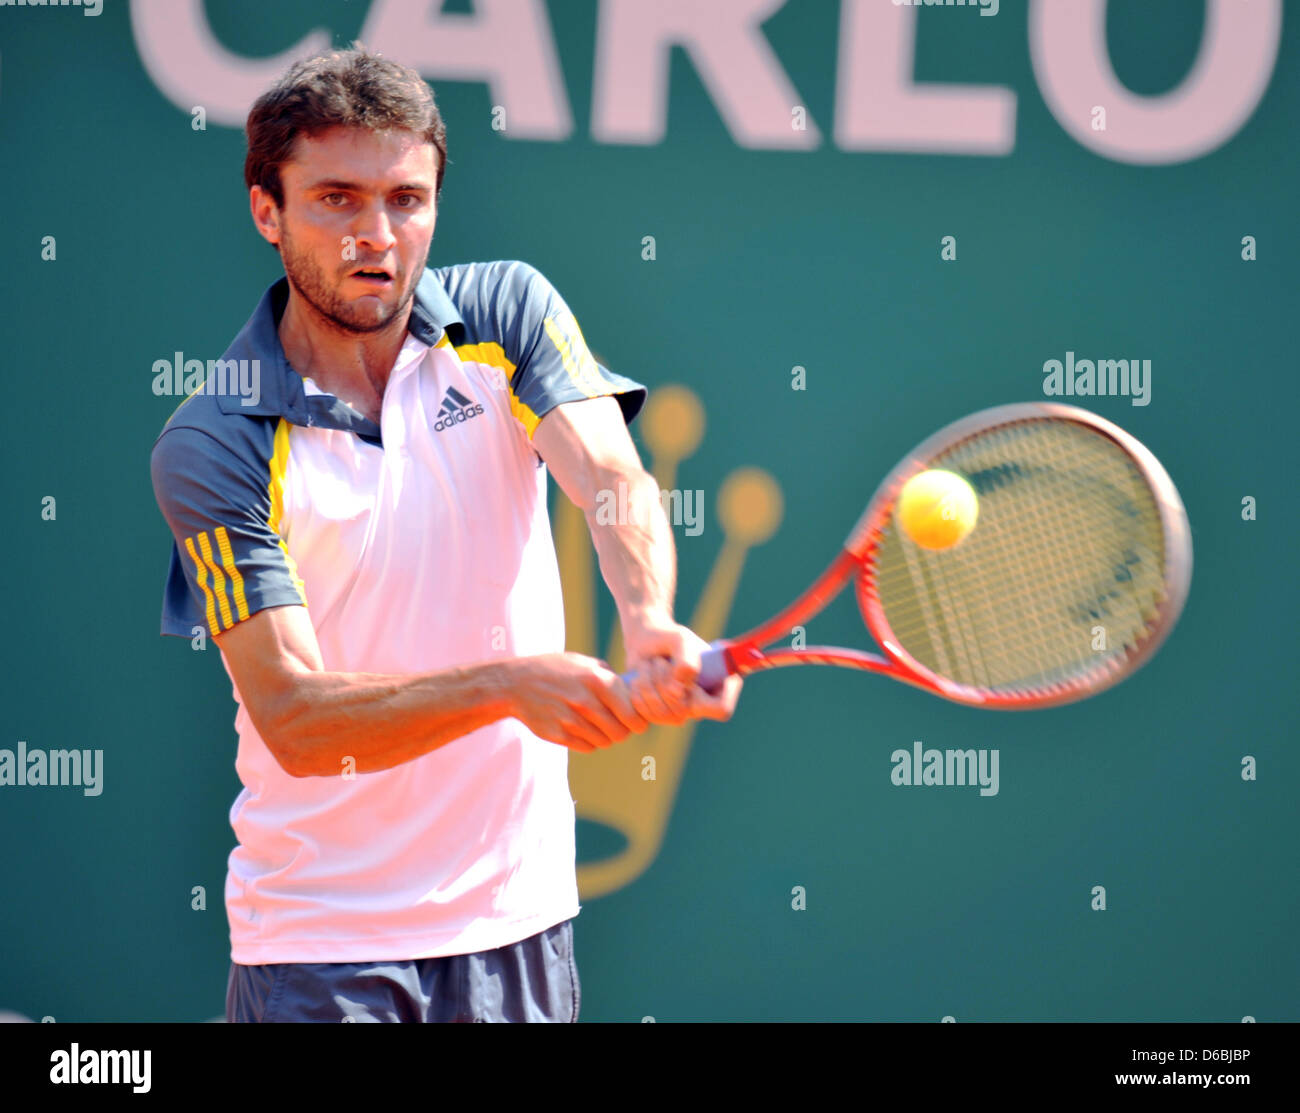 Monte Carlo, Monaco. 15th April, 2013. Rolex Masters Tennis. Gilles Simon (France) hits a backhand. Pic: Neal Simpson/Paul Marriott Photography/Alamy Live News Stock Photo